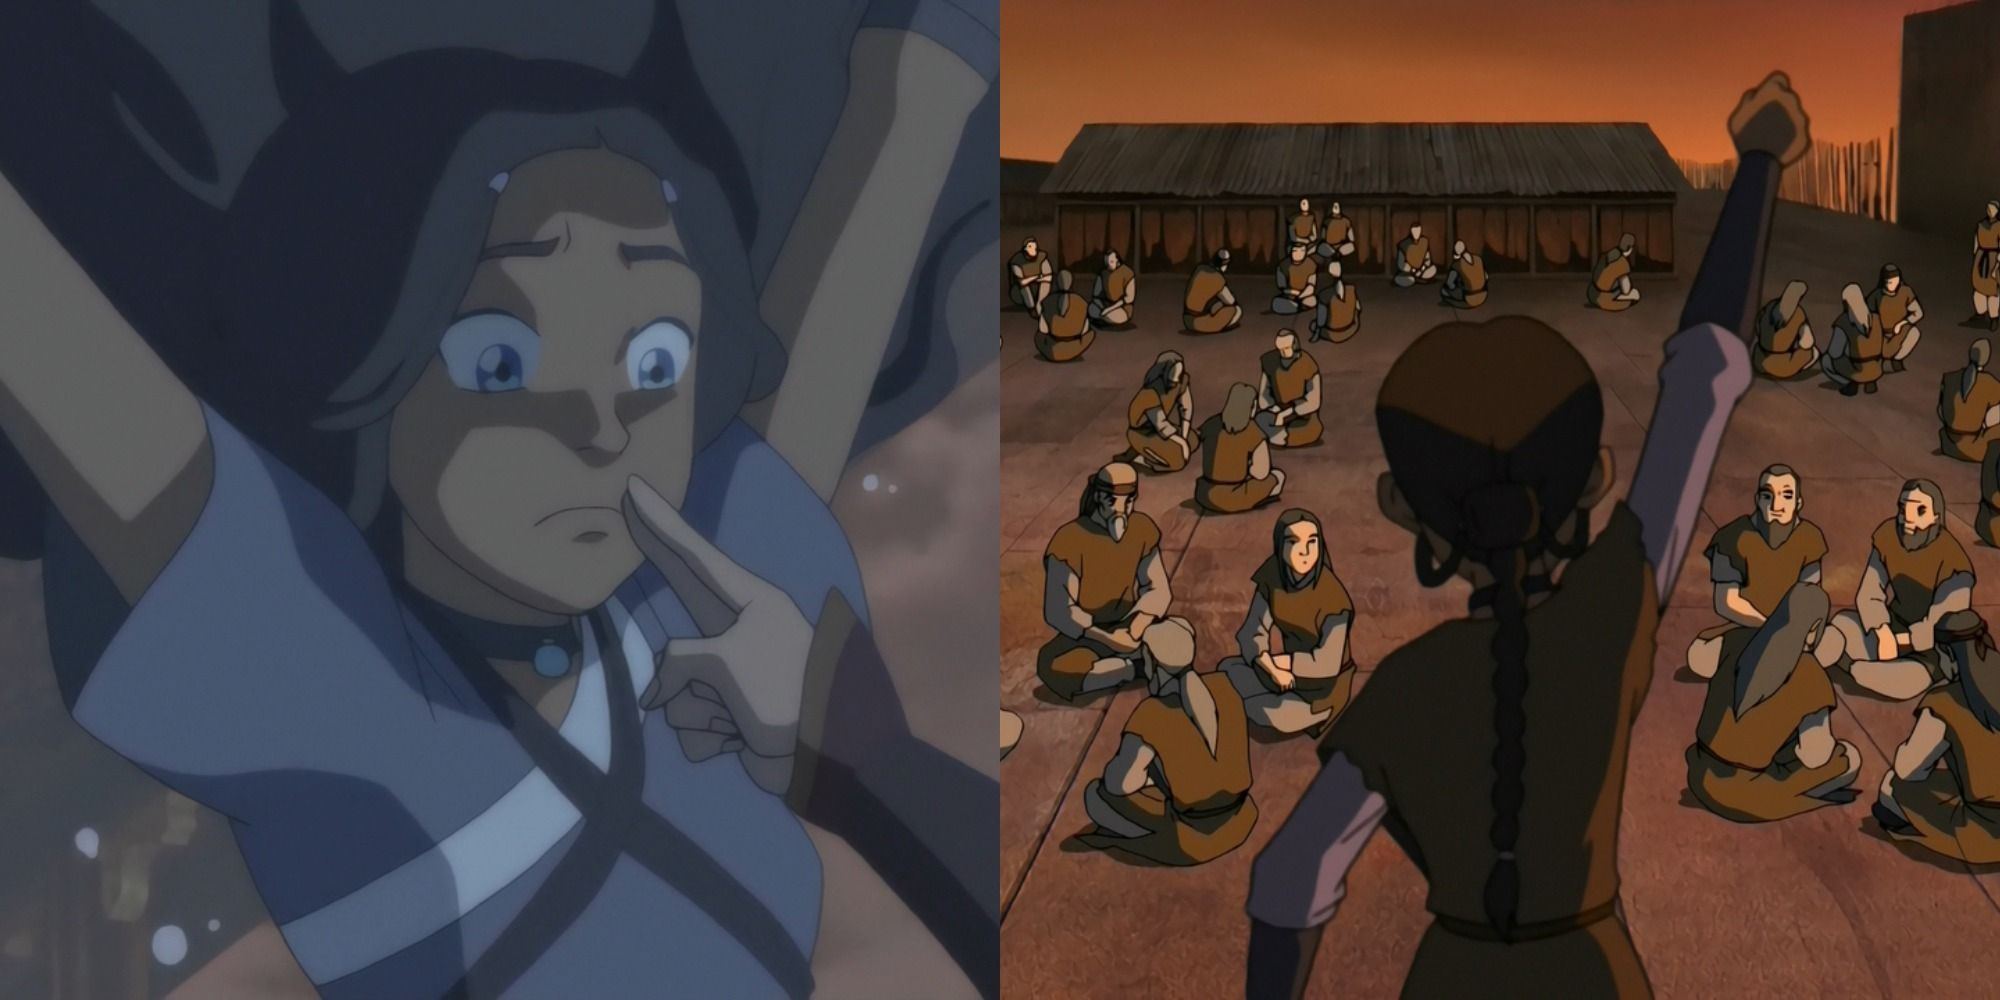 Split image showing Katara lifting her arms and floating, and her giving a speech to a crowd in Avatar The Last Airbender